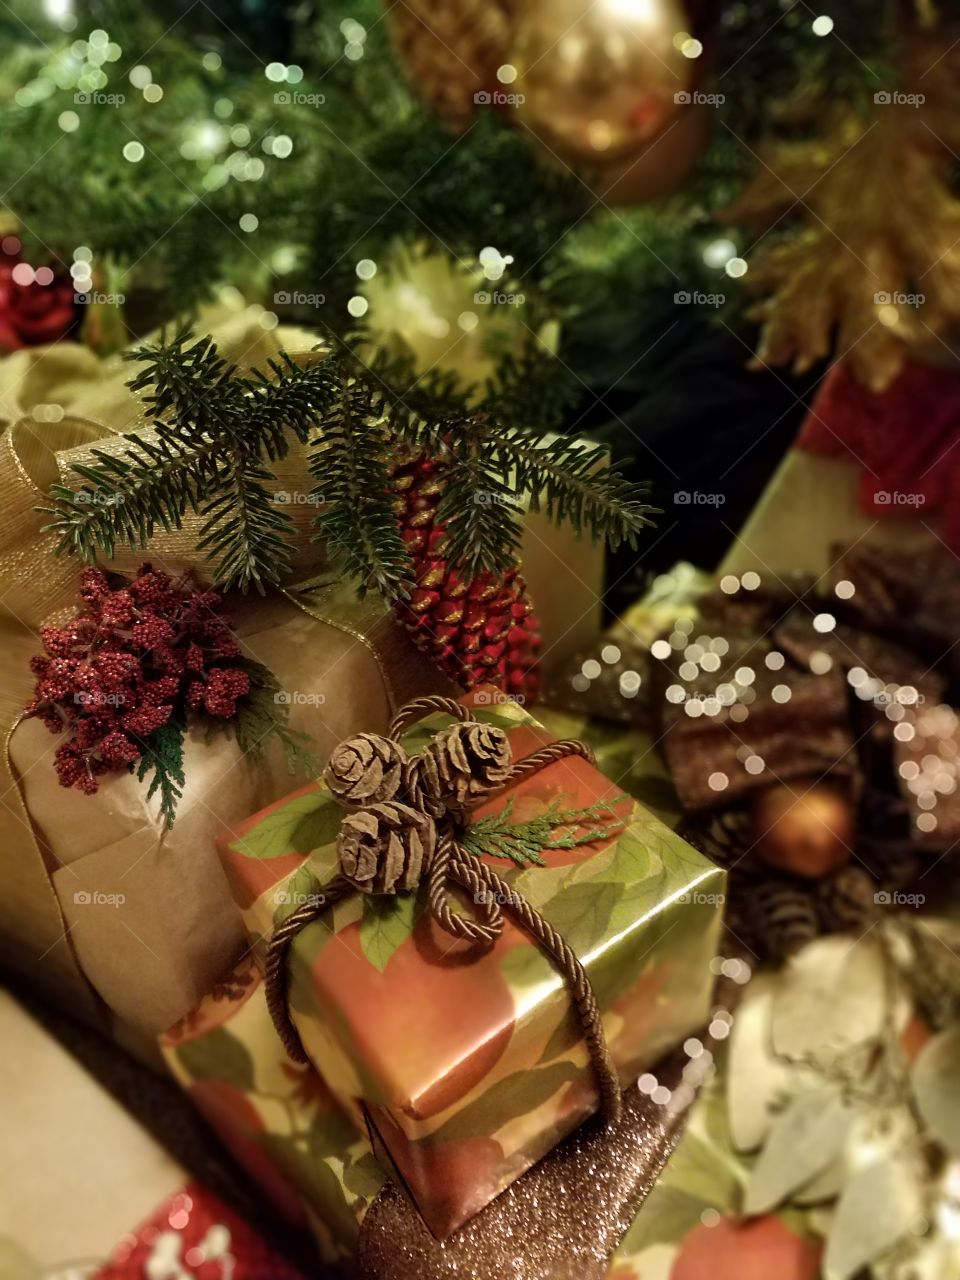 Wrapped gift underneath a Christmas tree